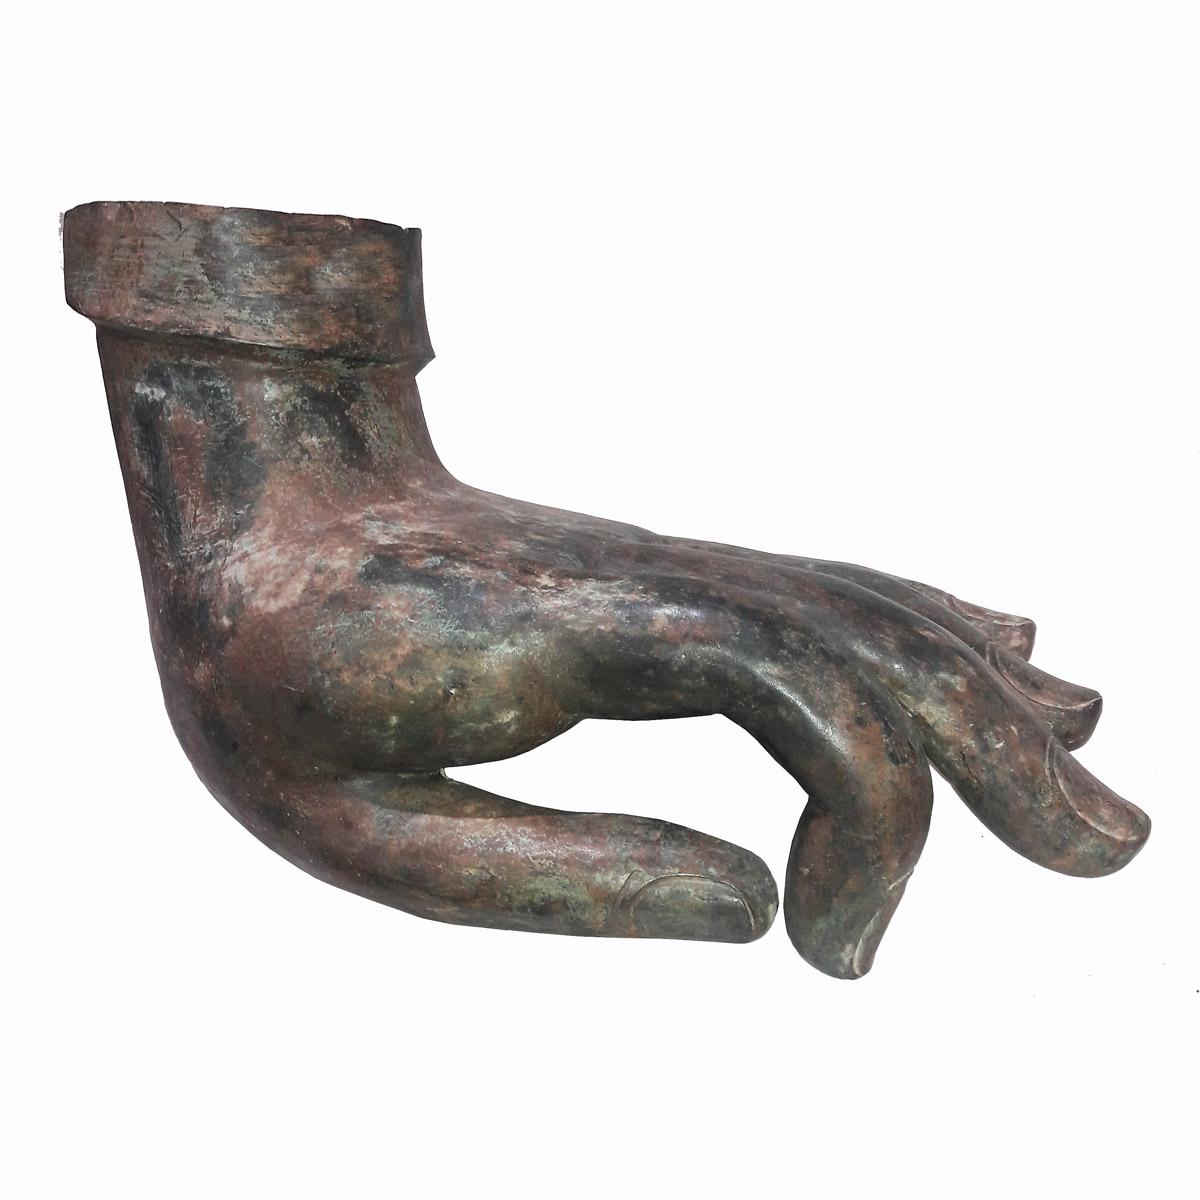 A bronze Buddha hand floor / table sculpture in Dharmchakra Mudra, the traditional gesture of teaching. 
Cast bronze with a natural green patina.